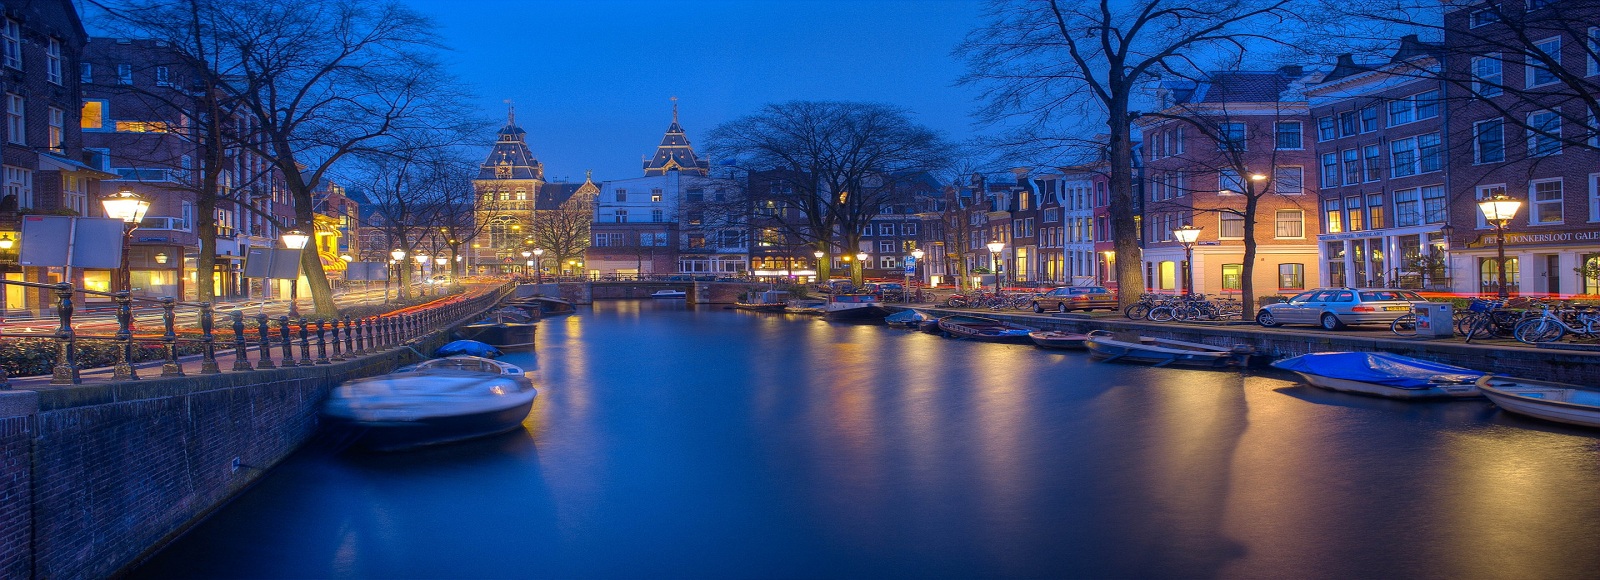 Transfer Offers in Netherlands. Low Cost Transfers in  Netherlands 